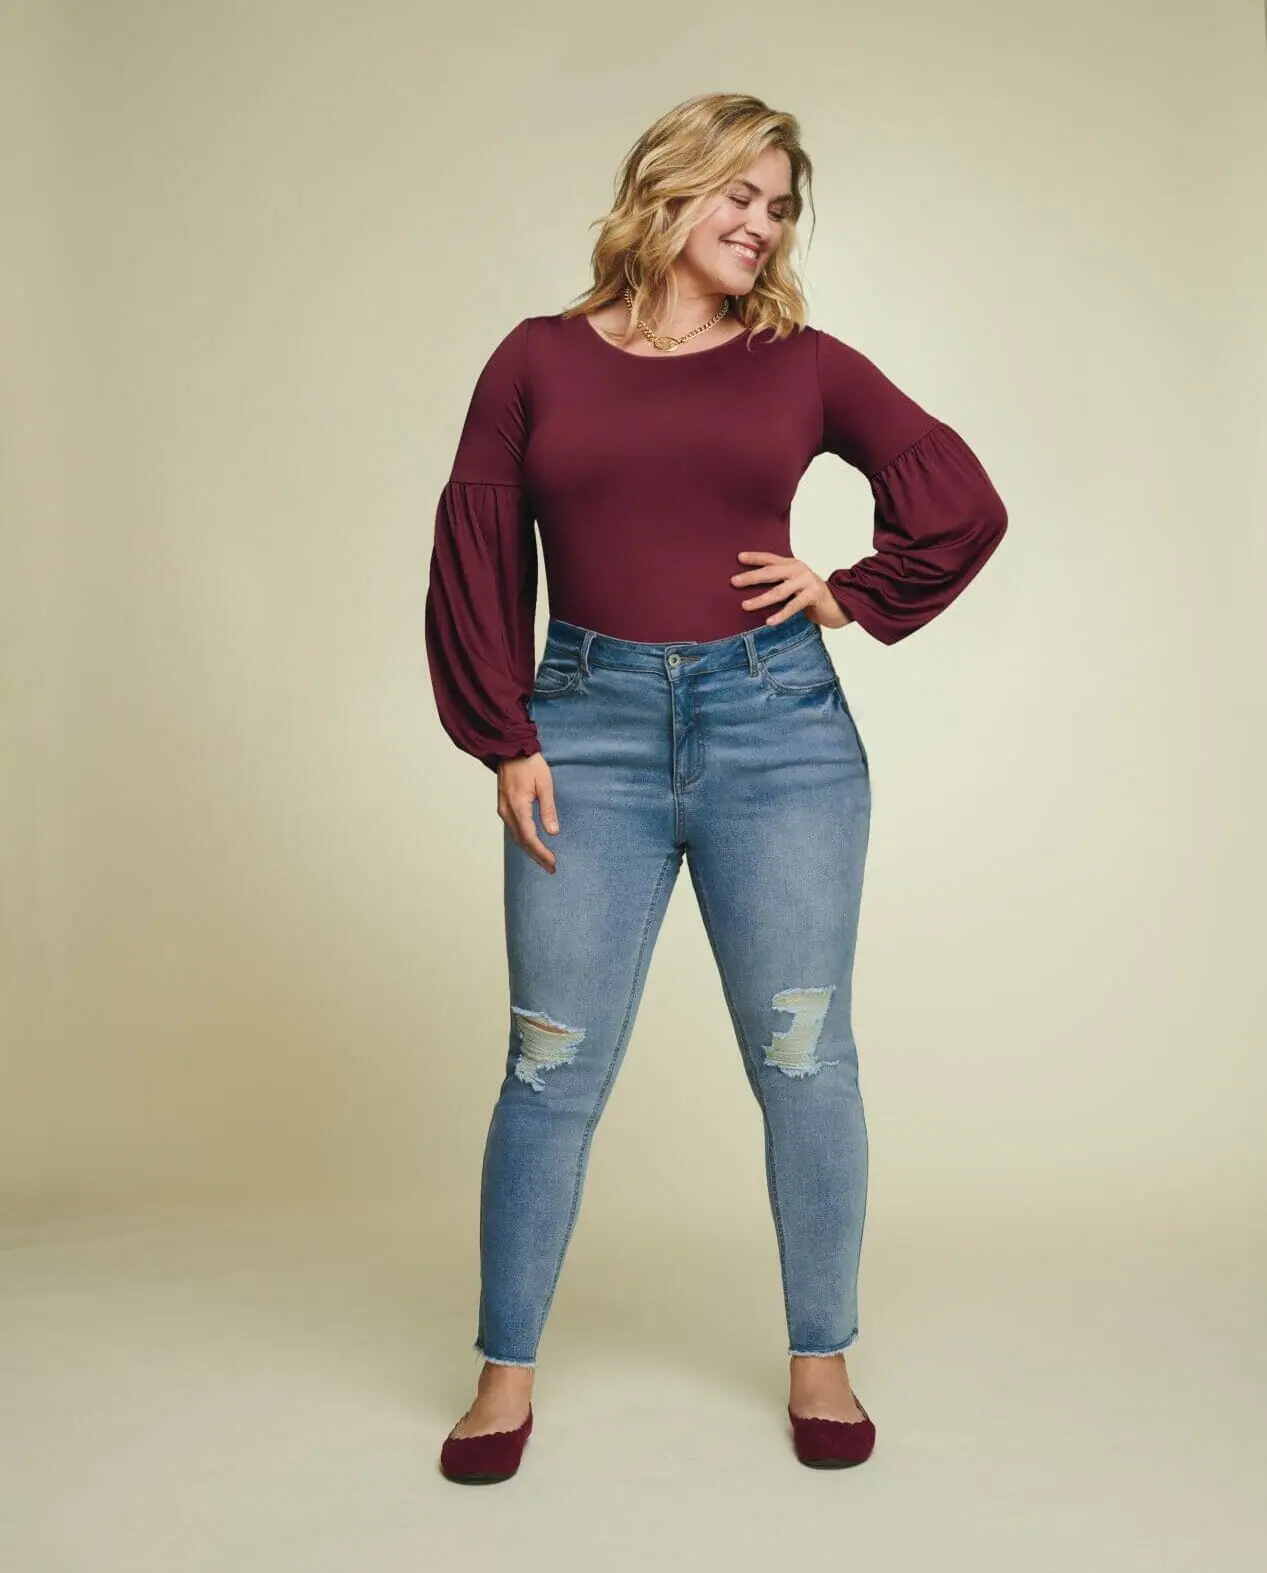 How to style plus-size high waisted jeans